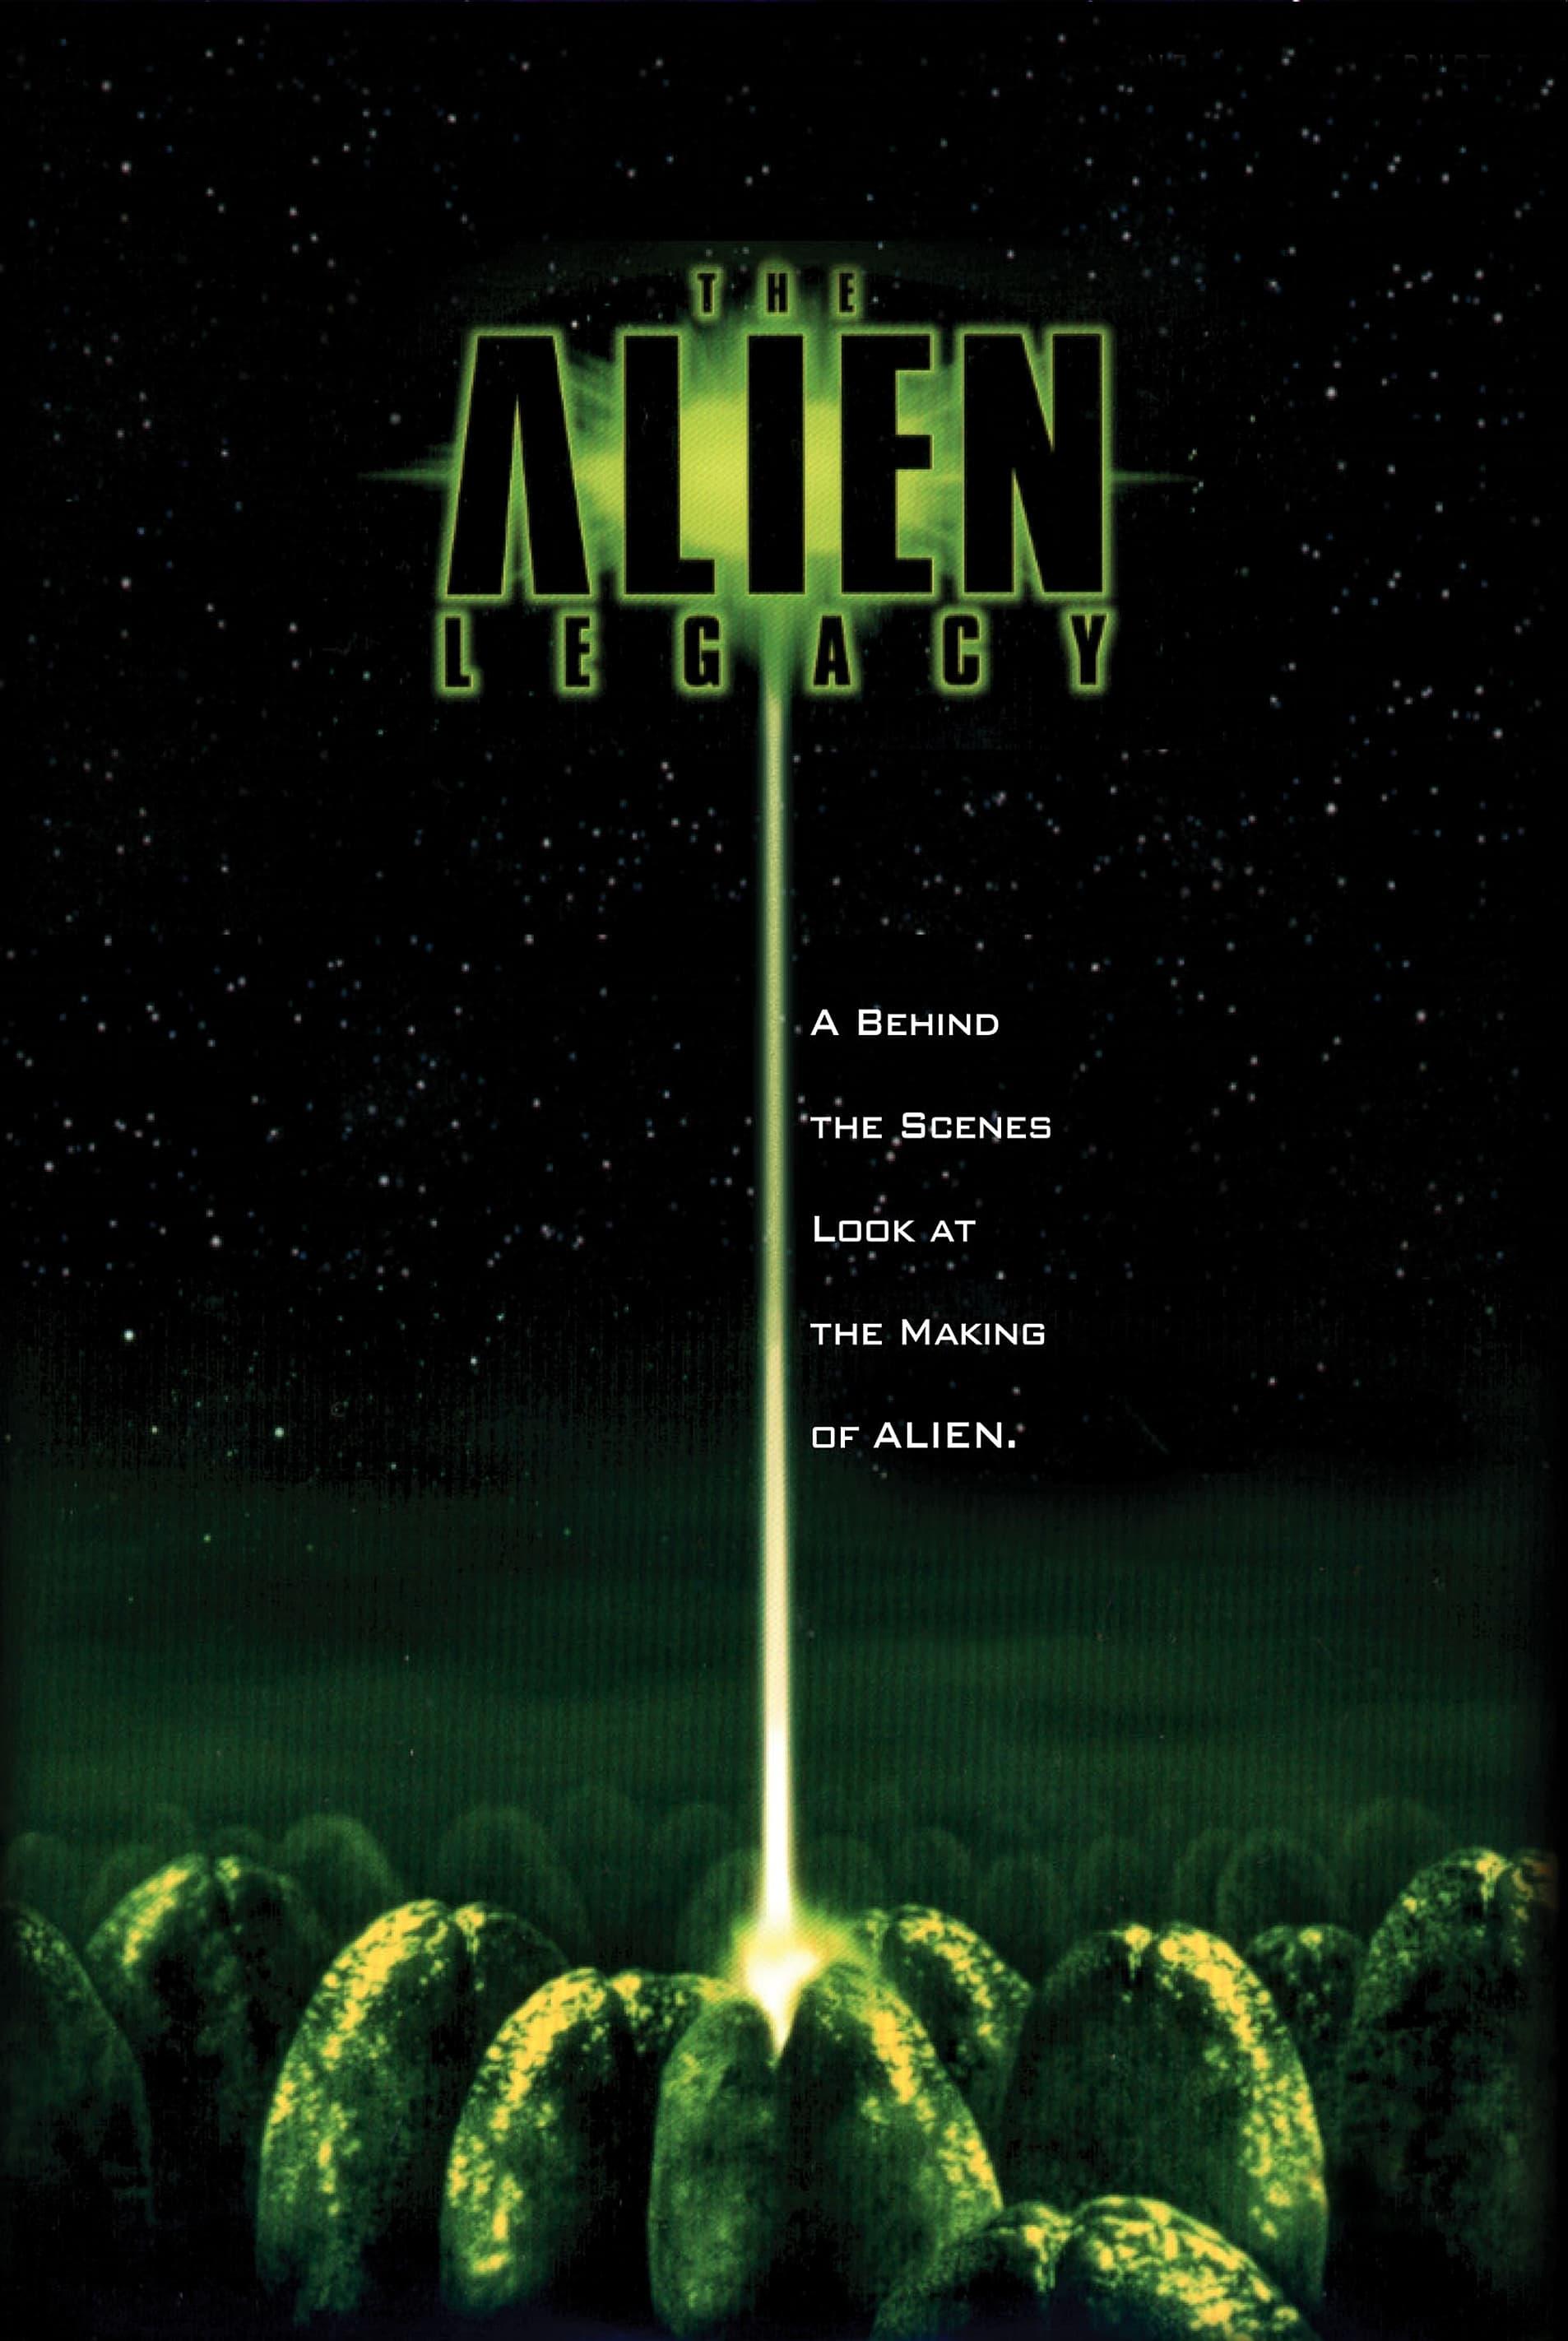 The Alien Legacy poster